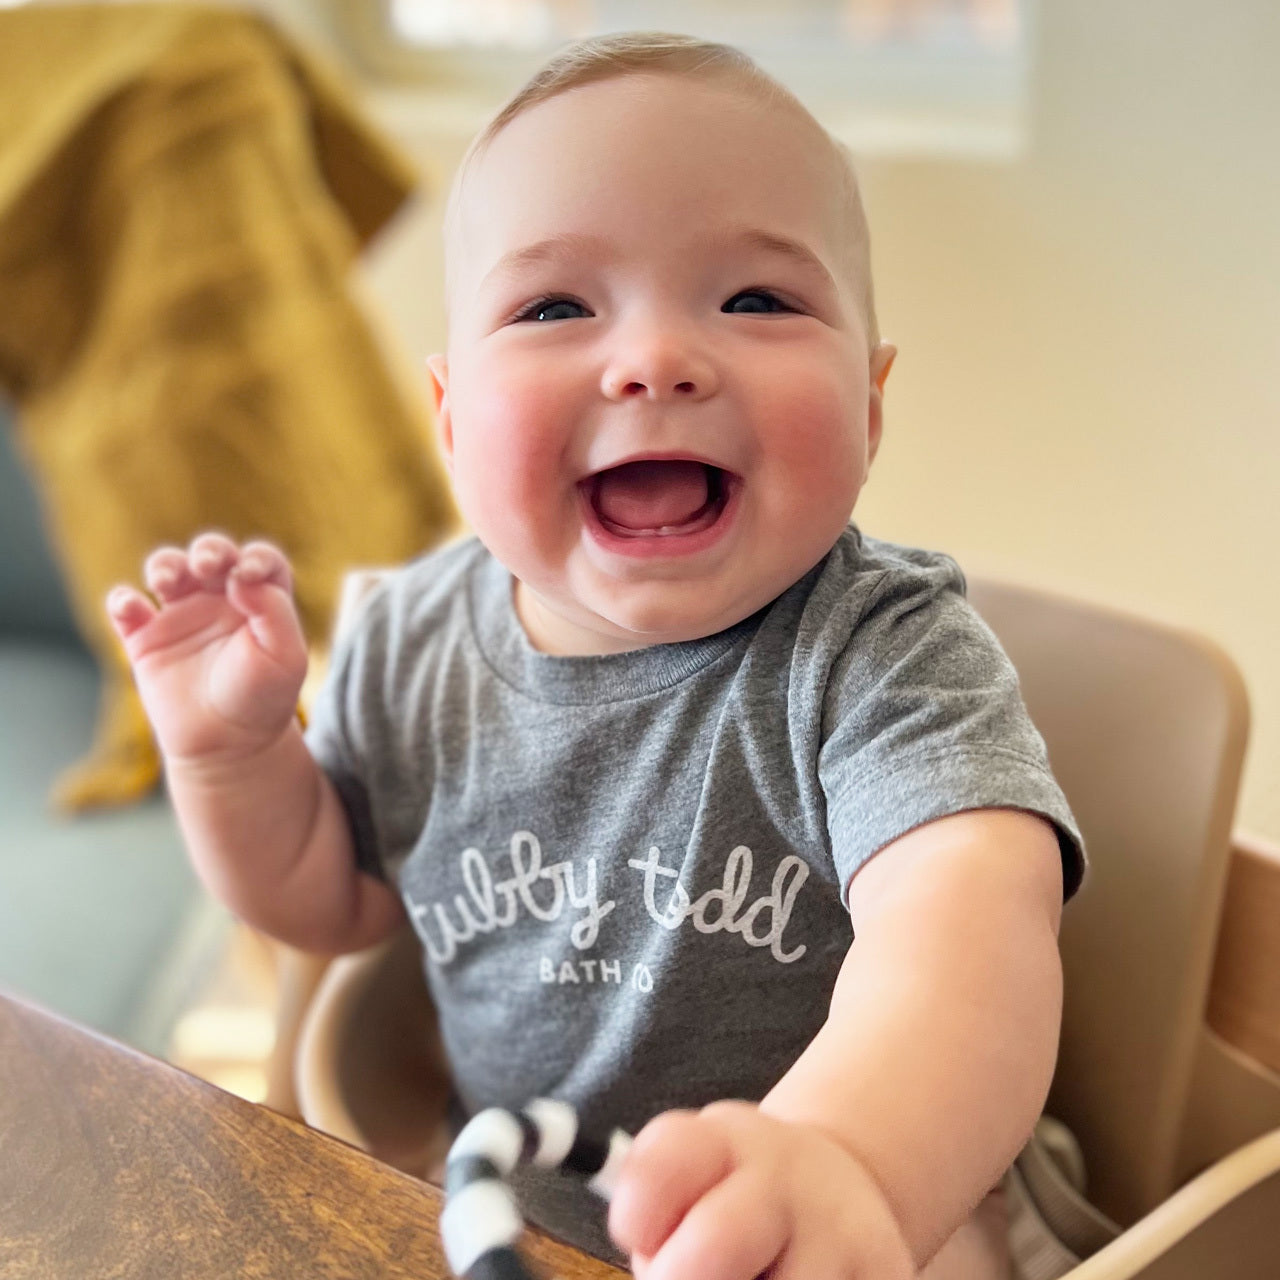 Baby wearing Tubby Todd grey baby tshirt while sitting in high chair with big smile